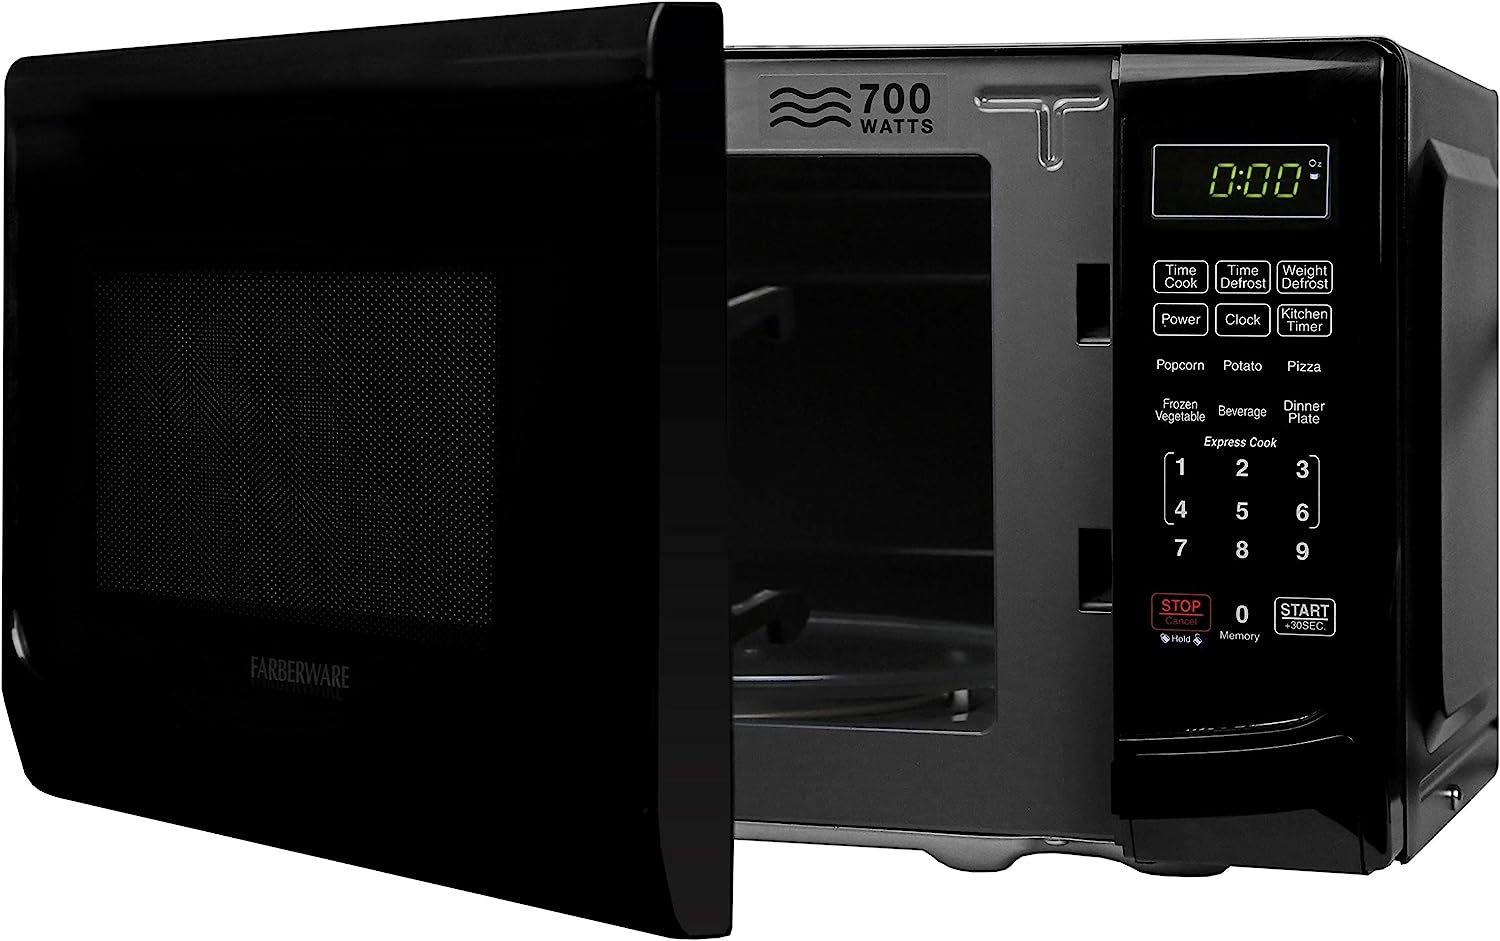 https://bigbigmart.com/wp-content/uploads/2023/07/Farberware-Countertop-Microwave-700-Watts-0.7-cu-ft-Microwave-Oven-With-LED-Lighting-and-Child-Lock-Perfect-for-Apartments-and-Dorms-Easy-Clean-Grey-Interior-Retro-Black8.jpg